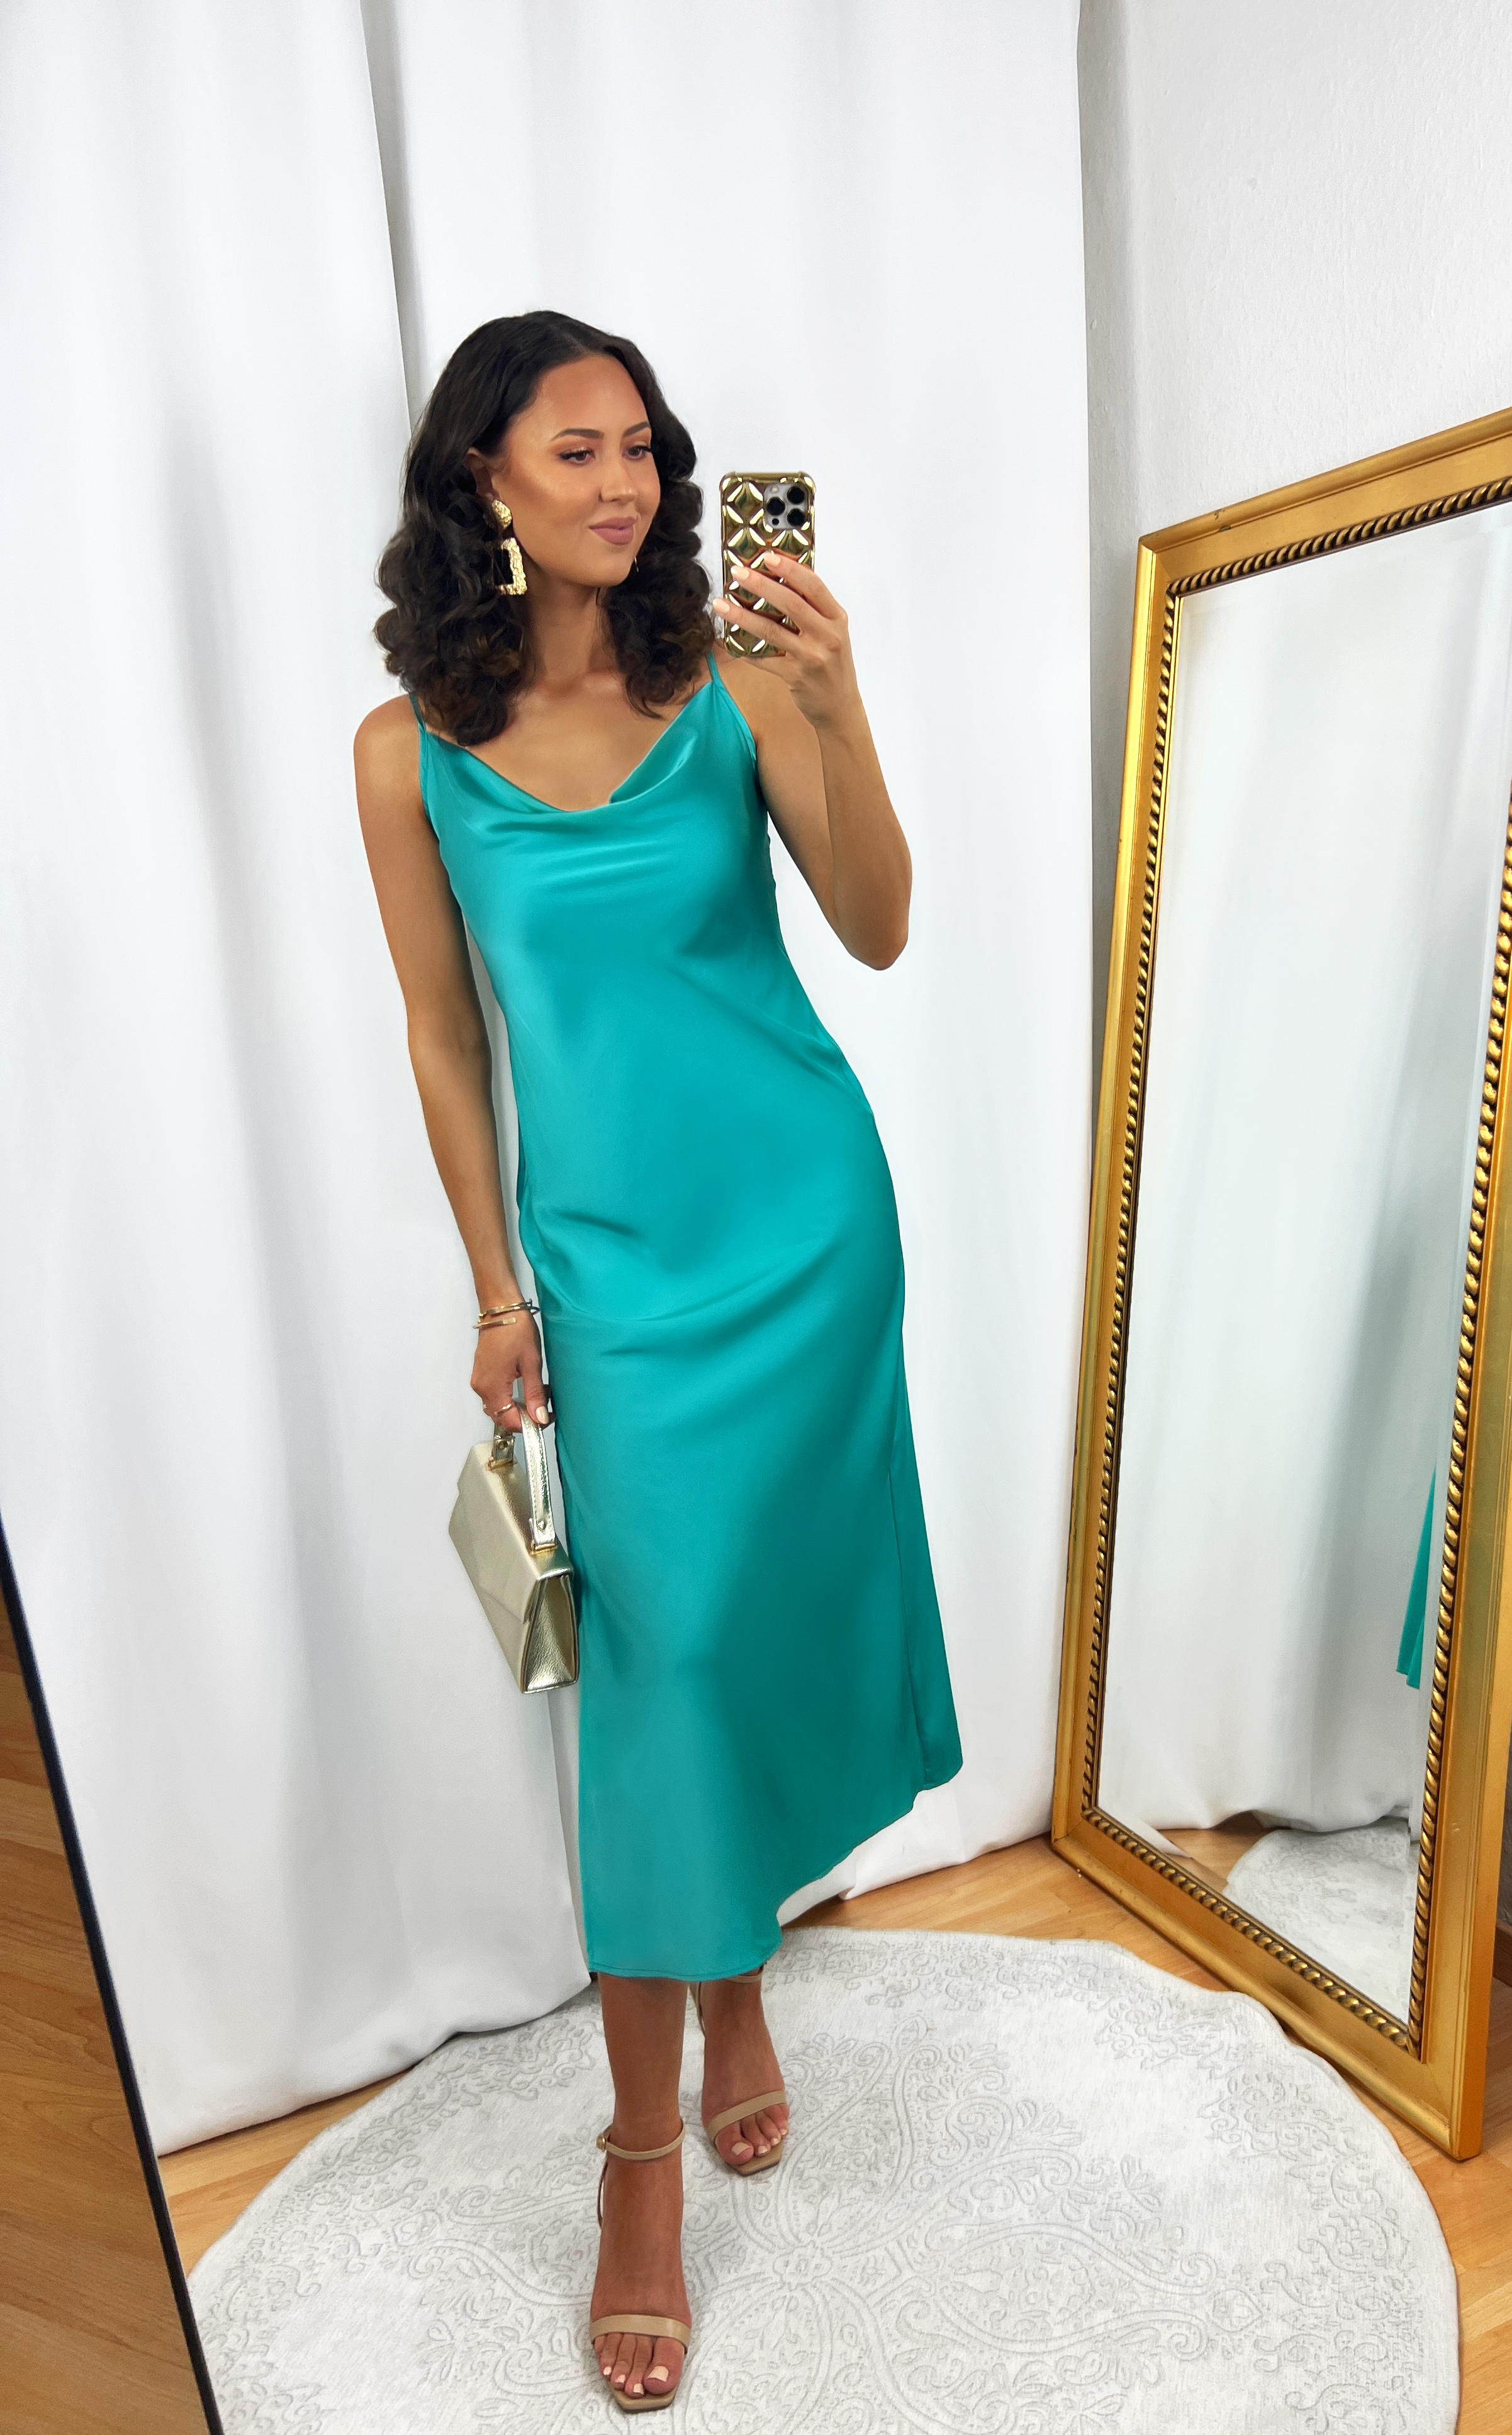 Turquoise Slip Dress Outfit